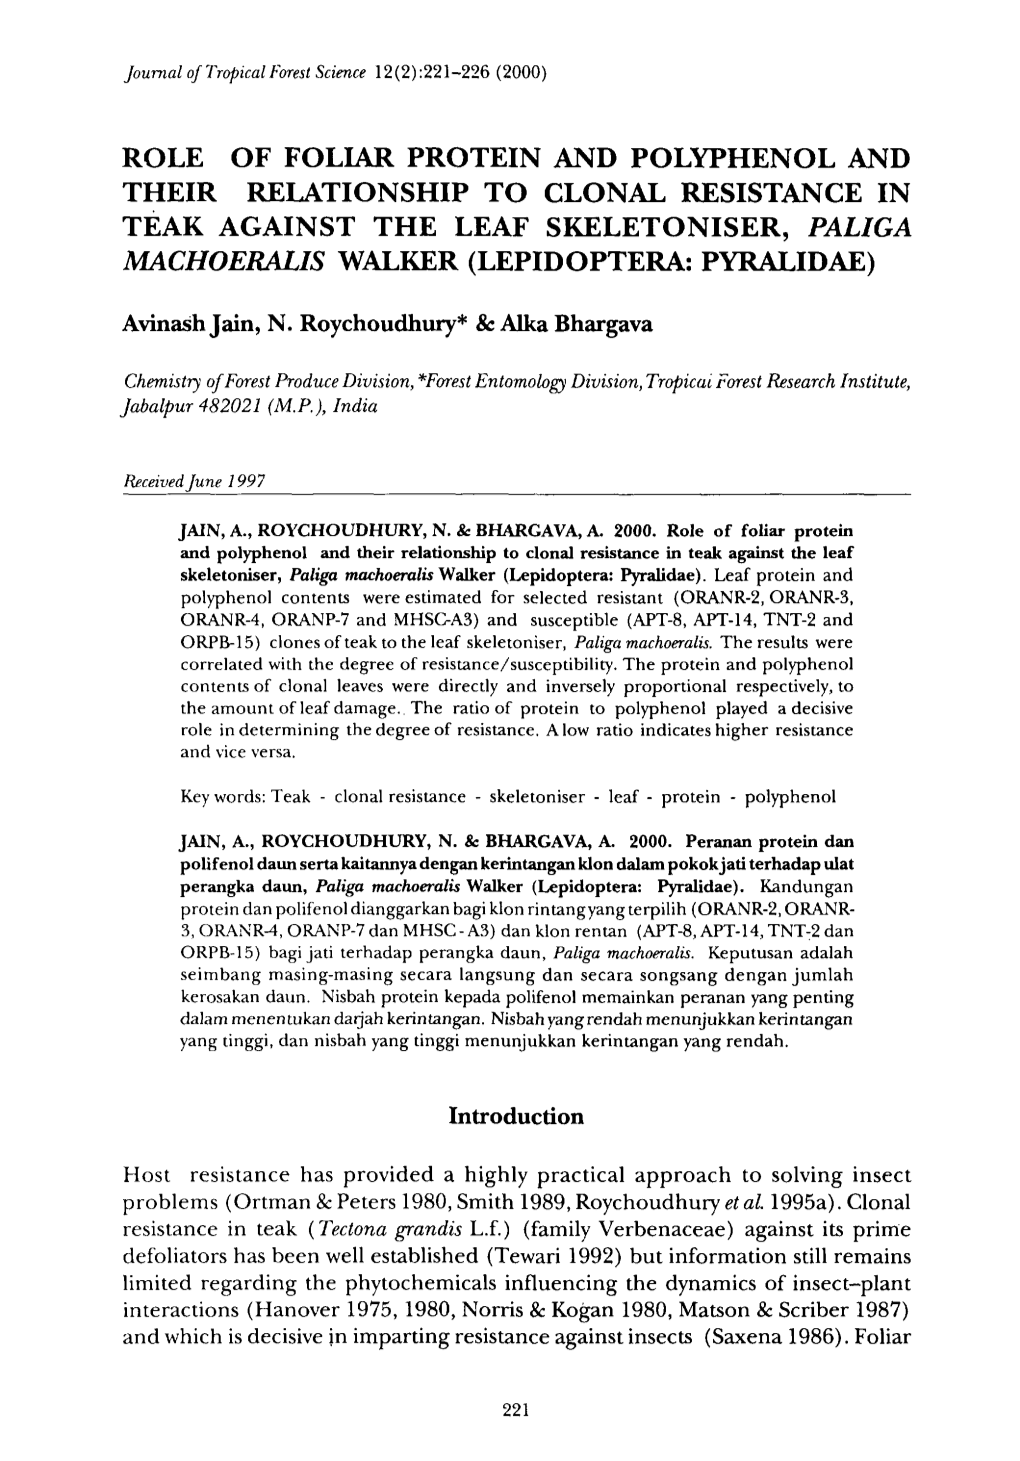 Role of Foliar Protein and Polyphenol and Their